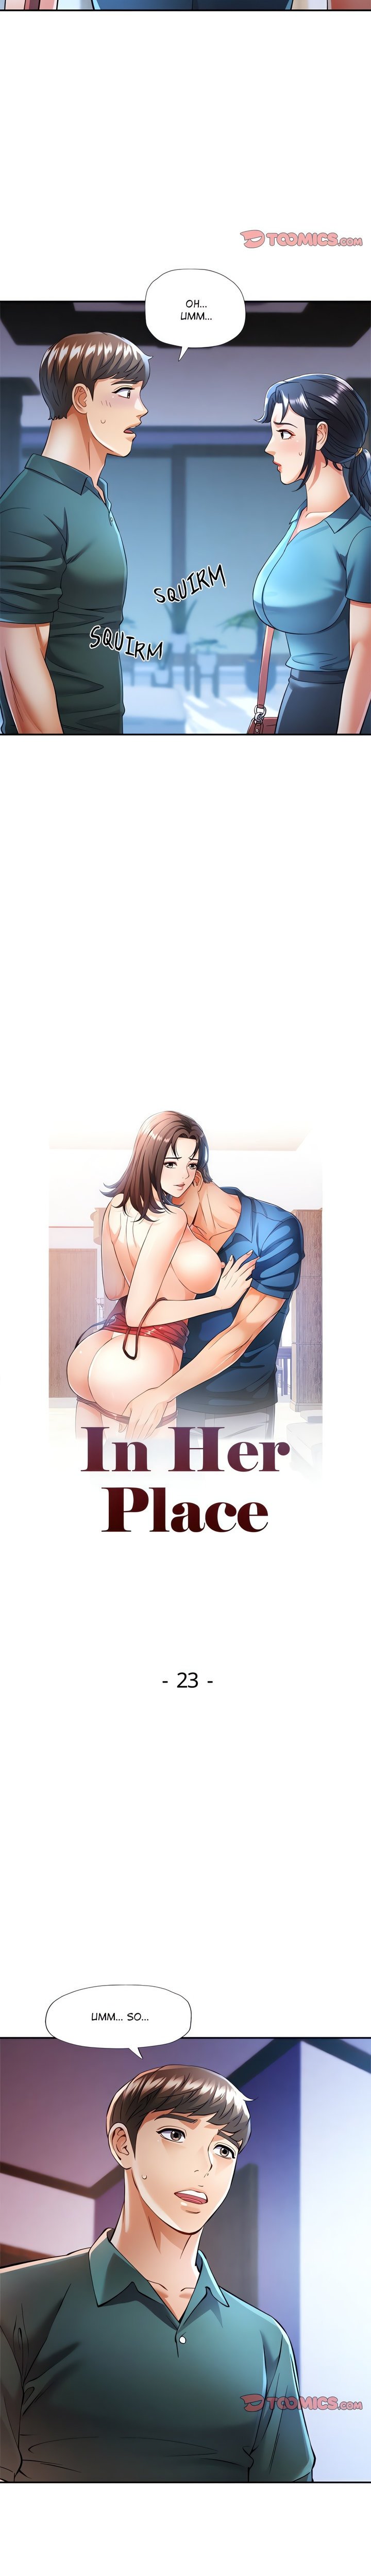 in-her-place-chap-23-1